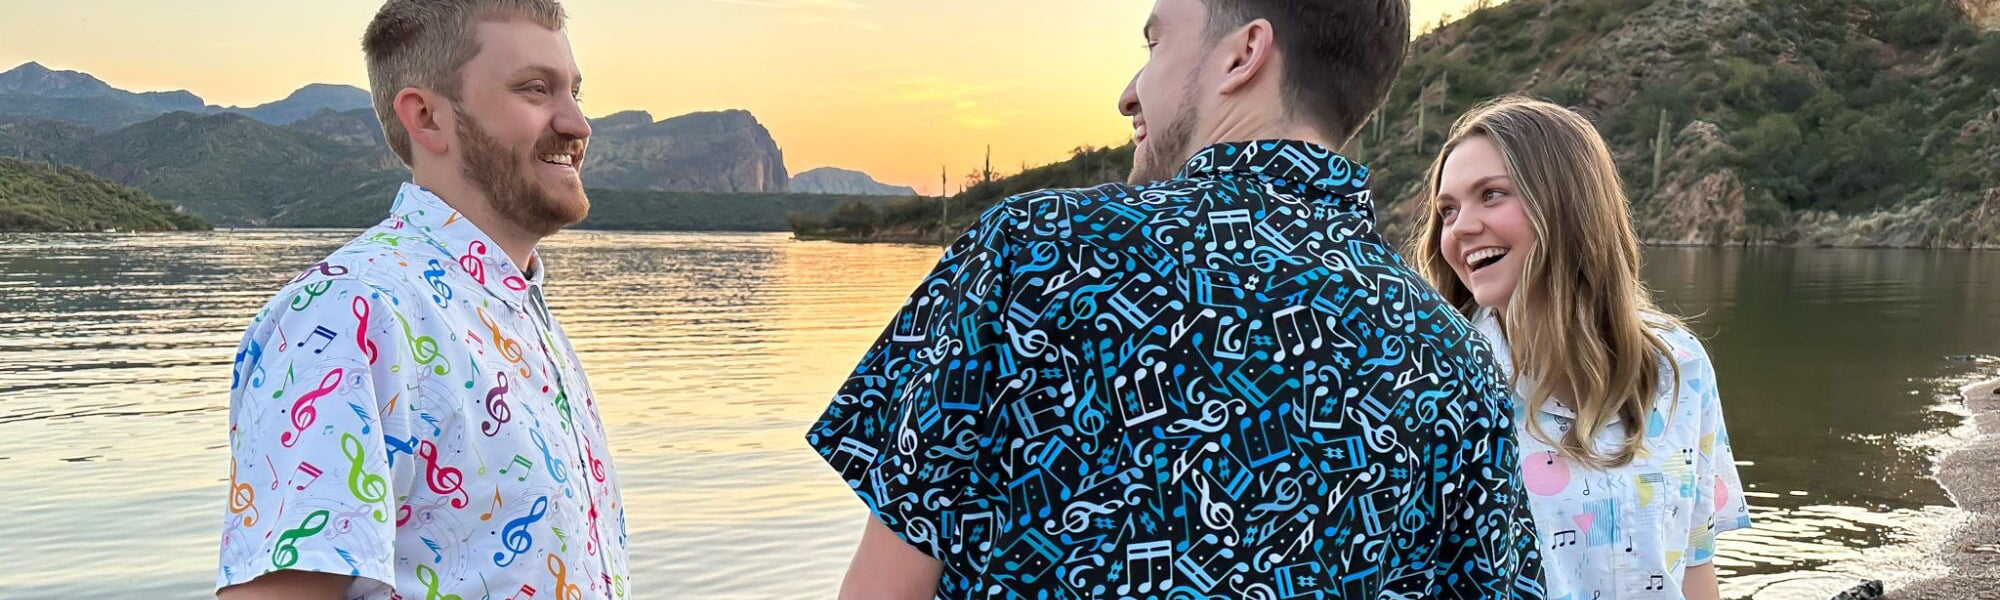 Three friends wearing their favorite geeky music themed button up shirts stand together at the edge of a lake at sunset. These shirts are perfect for music festivals or casual hangouts with fellow music enthusiasts.